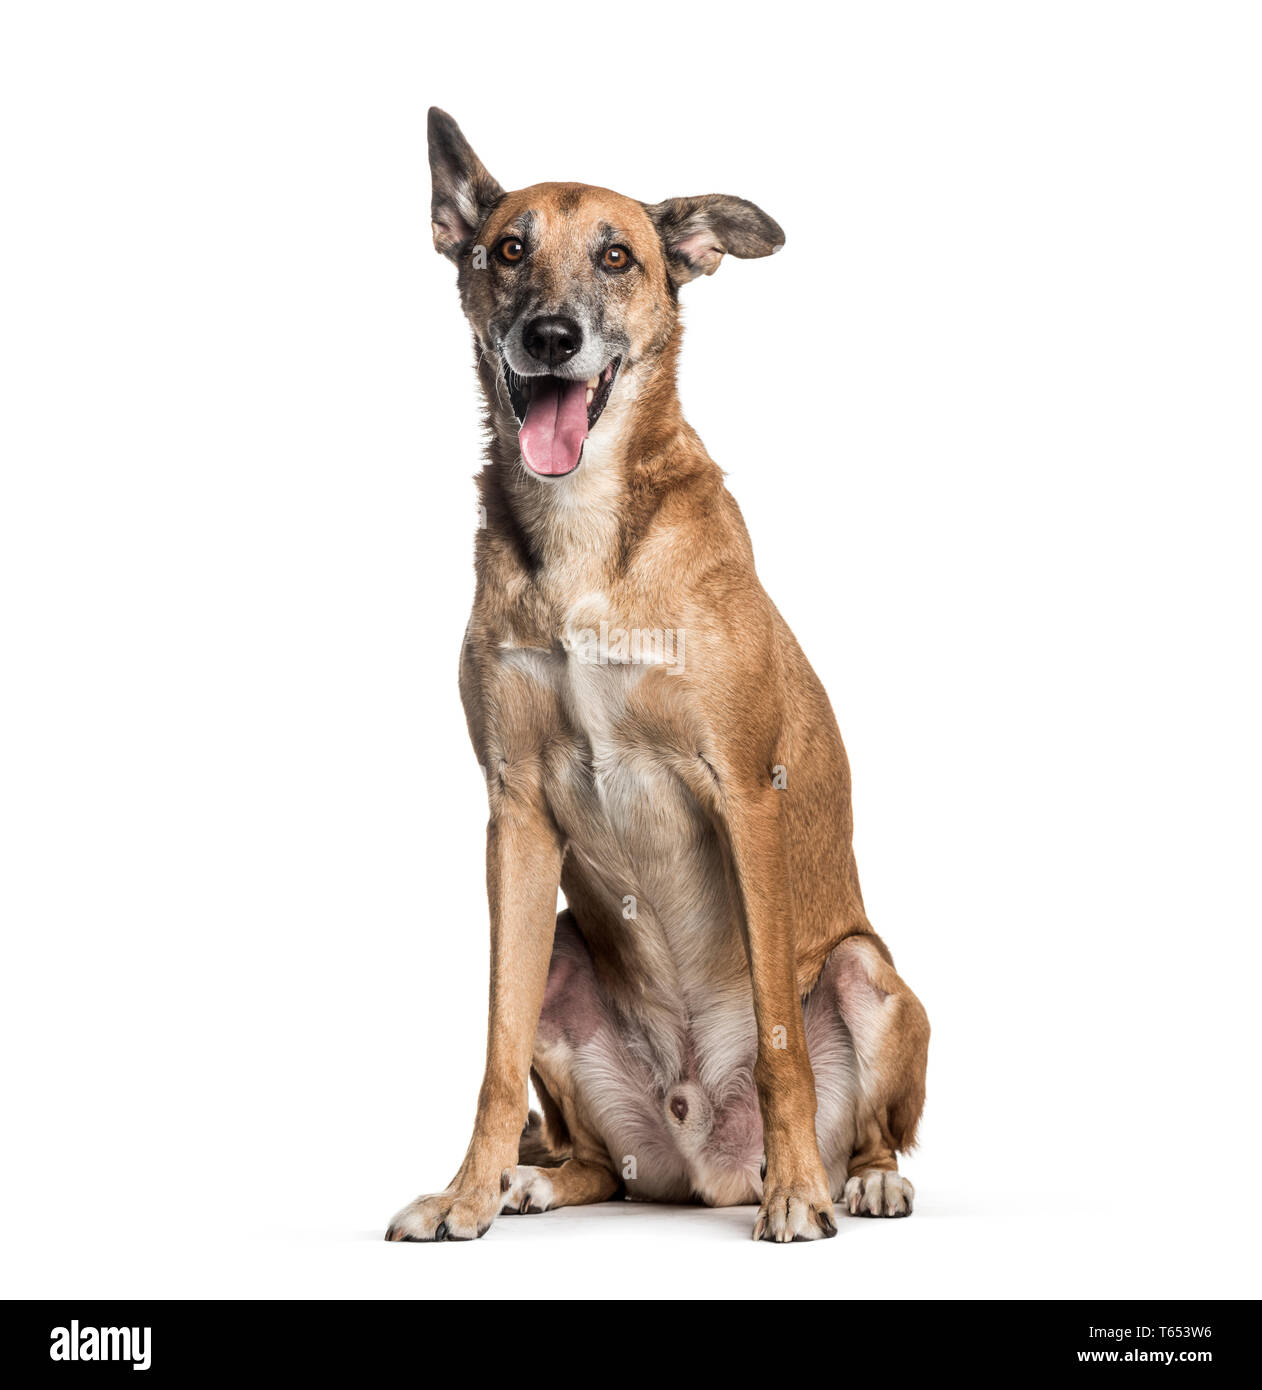 Mixed-breed dog, 8 years old, sitting in front of white background Stock Photo